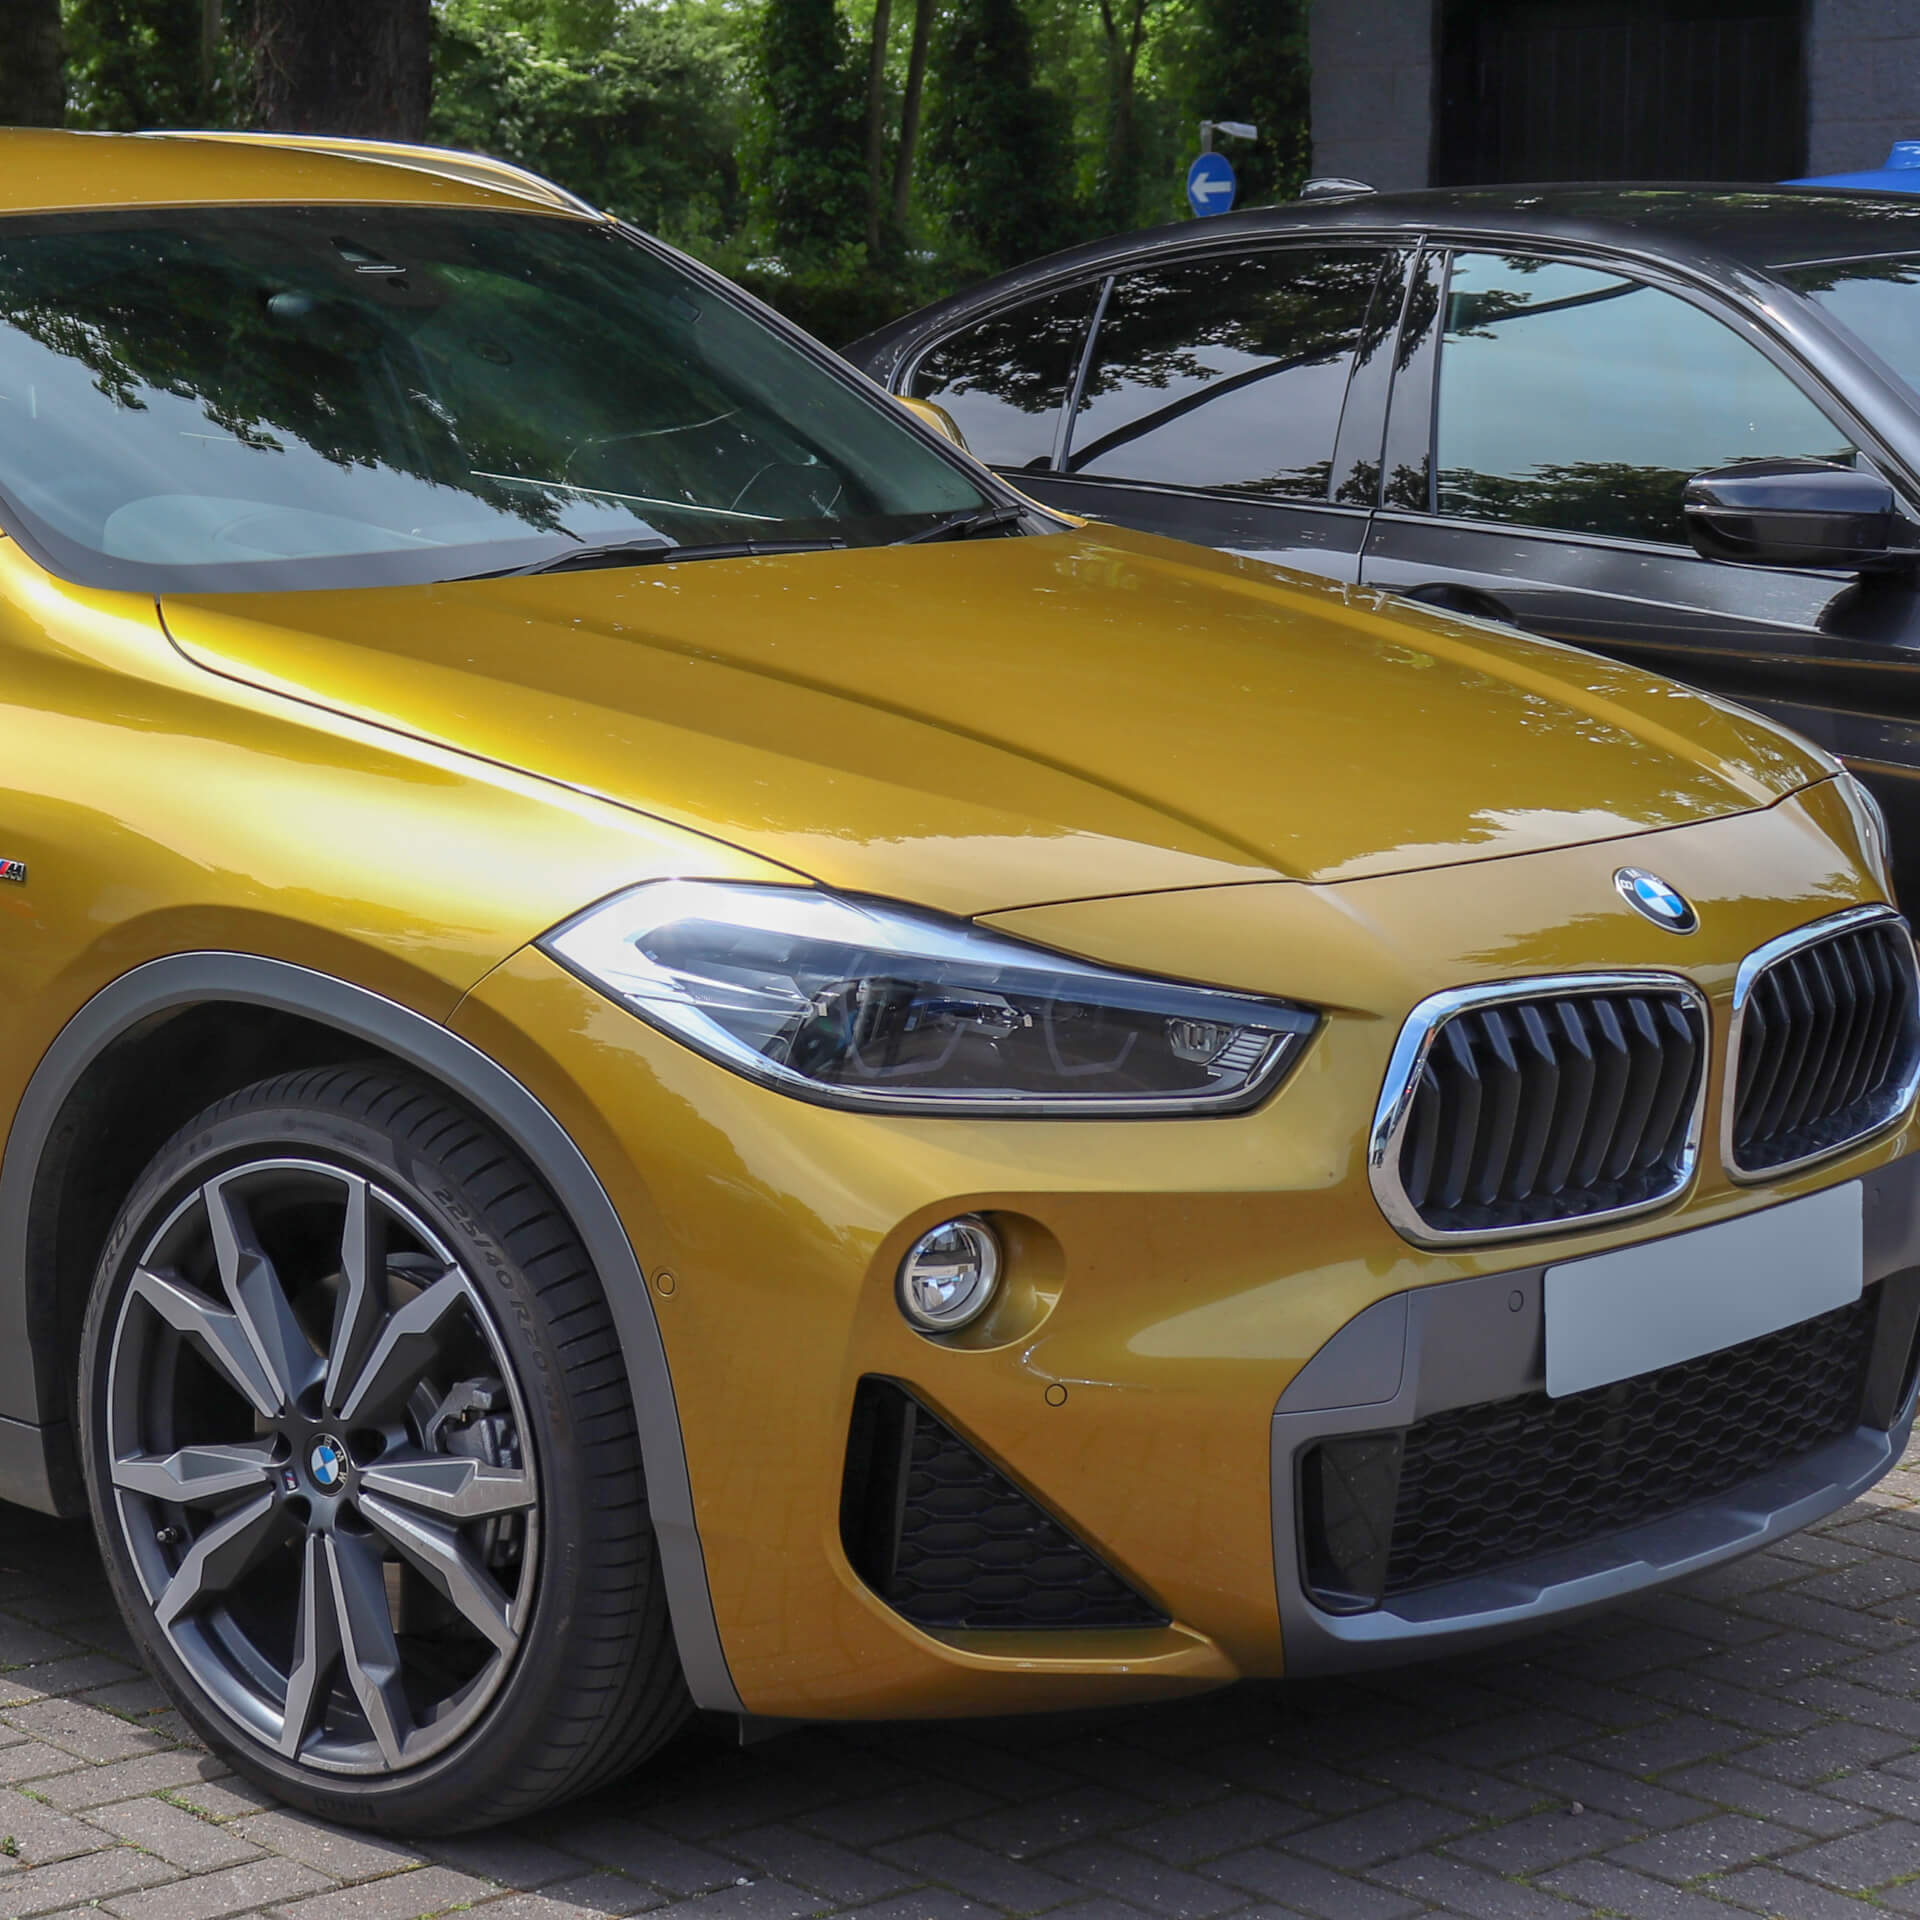 Direct4x4 accessories for BMW X2 vehicles with a photo of the front of a BMW X2